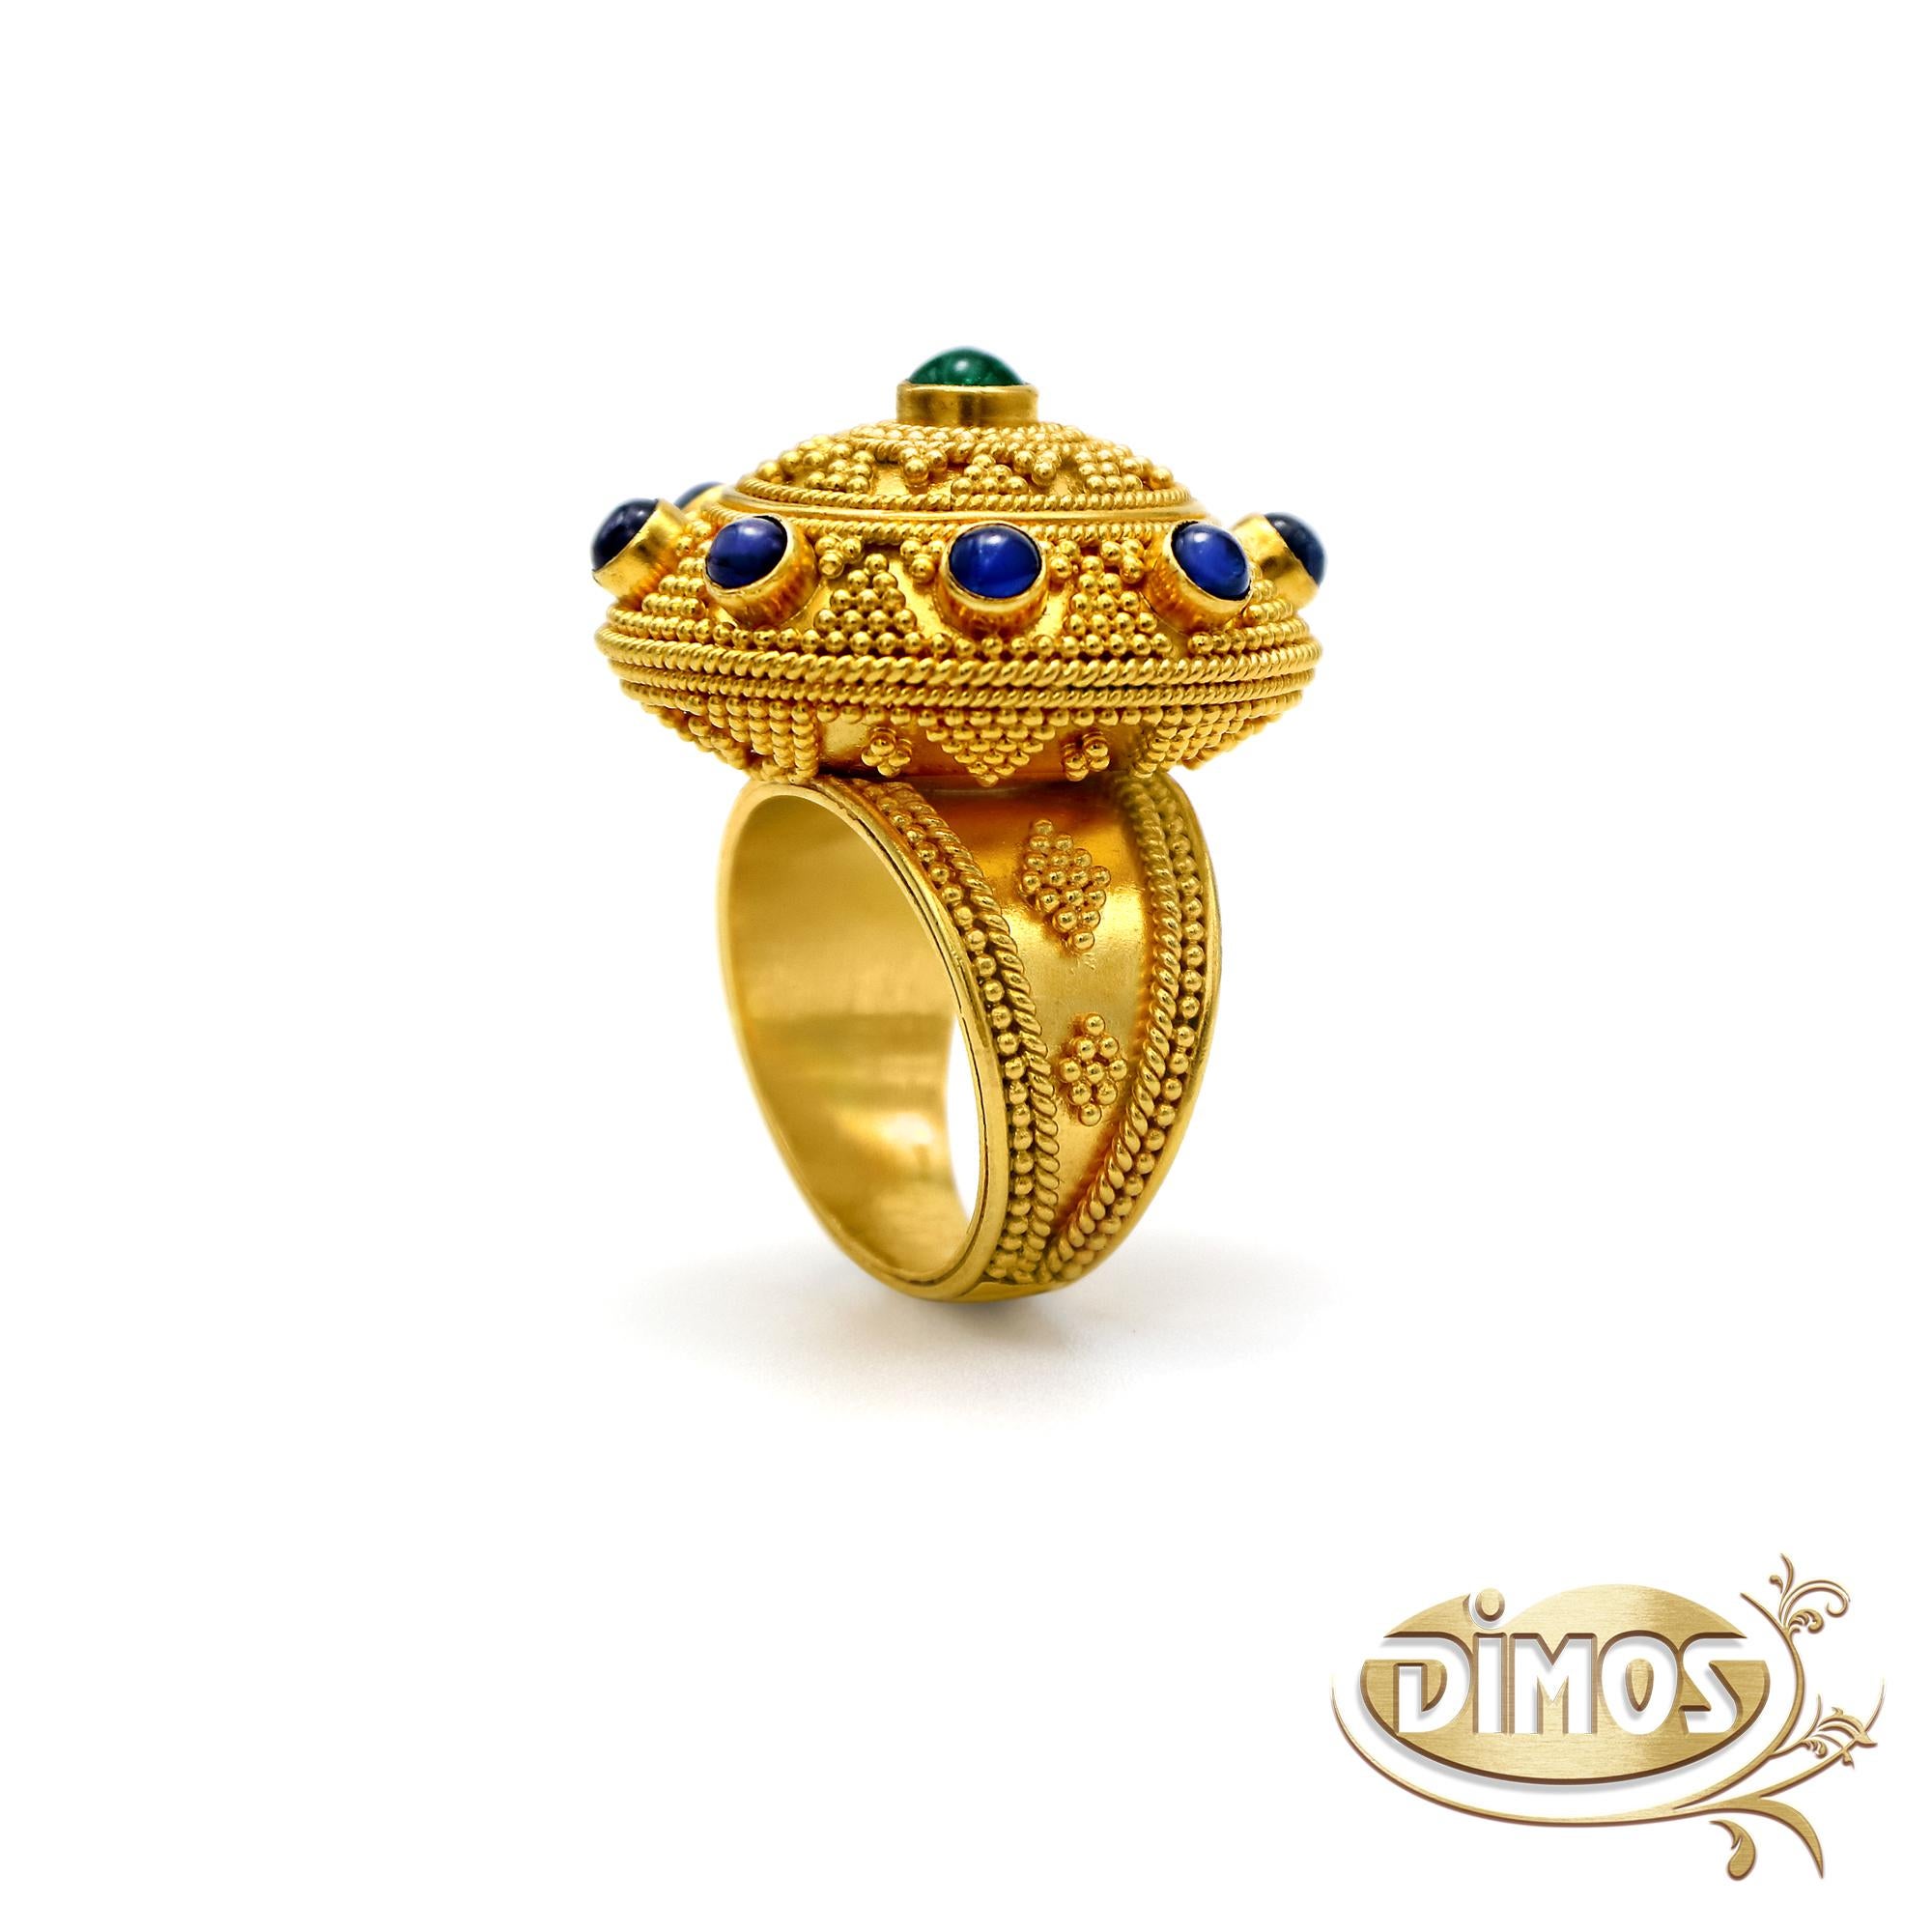 The ring of mobile art. A dome 22k gold creation based of museum work and a high level of workmanship skill that it takes years to achieve. The granulation work covers the whole ring and even the bottom part of the dome. The cabochon stones 1.60